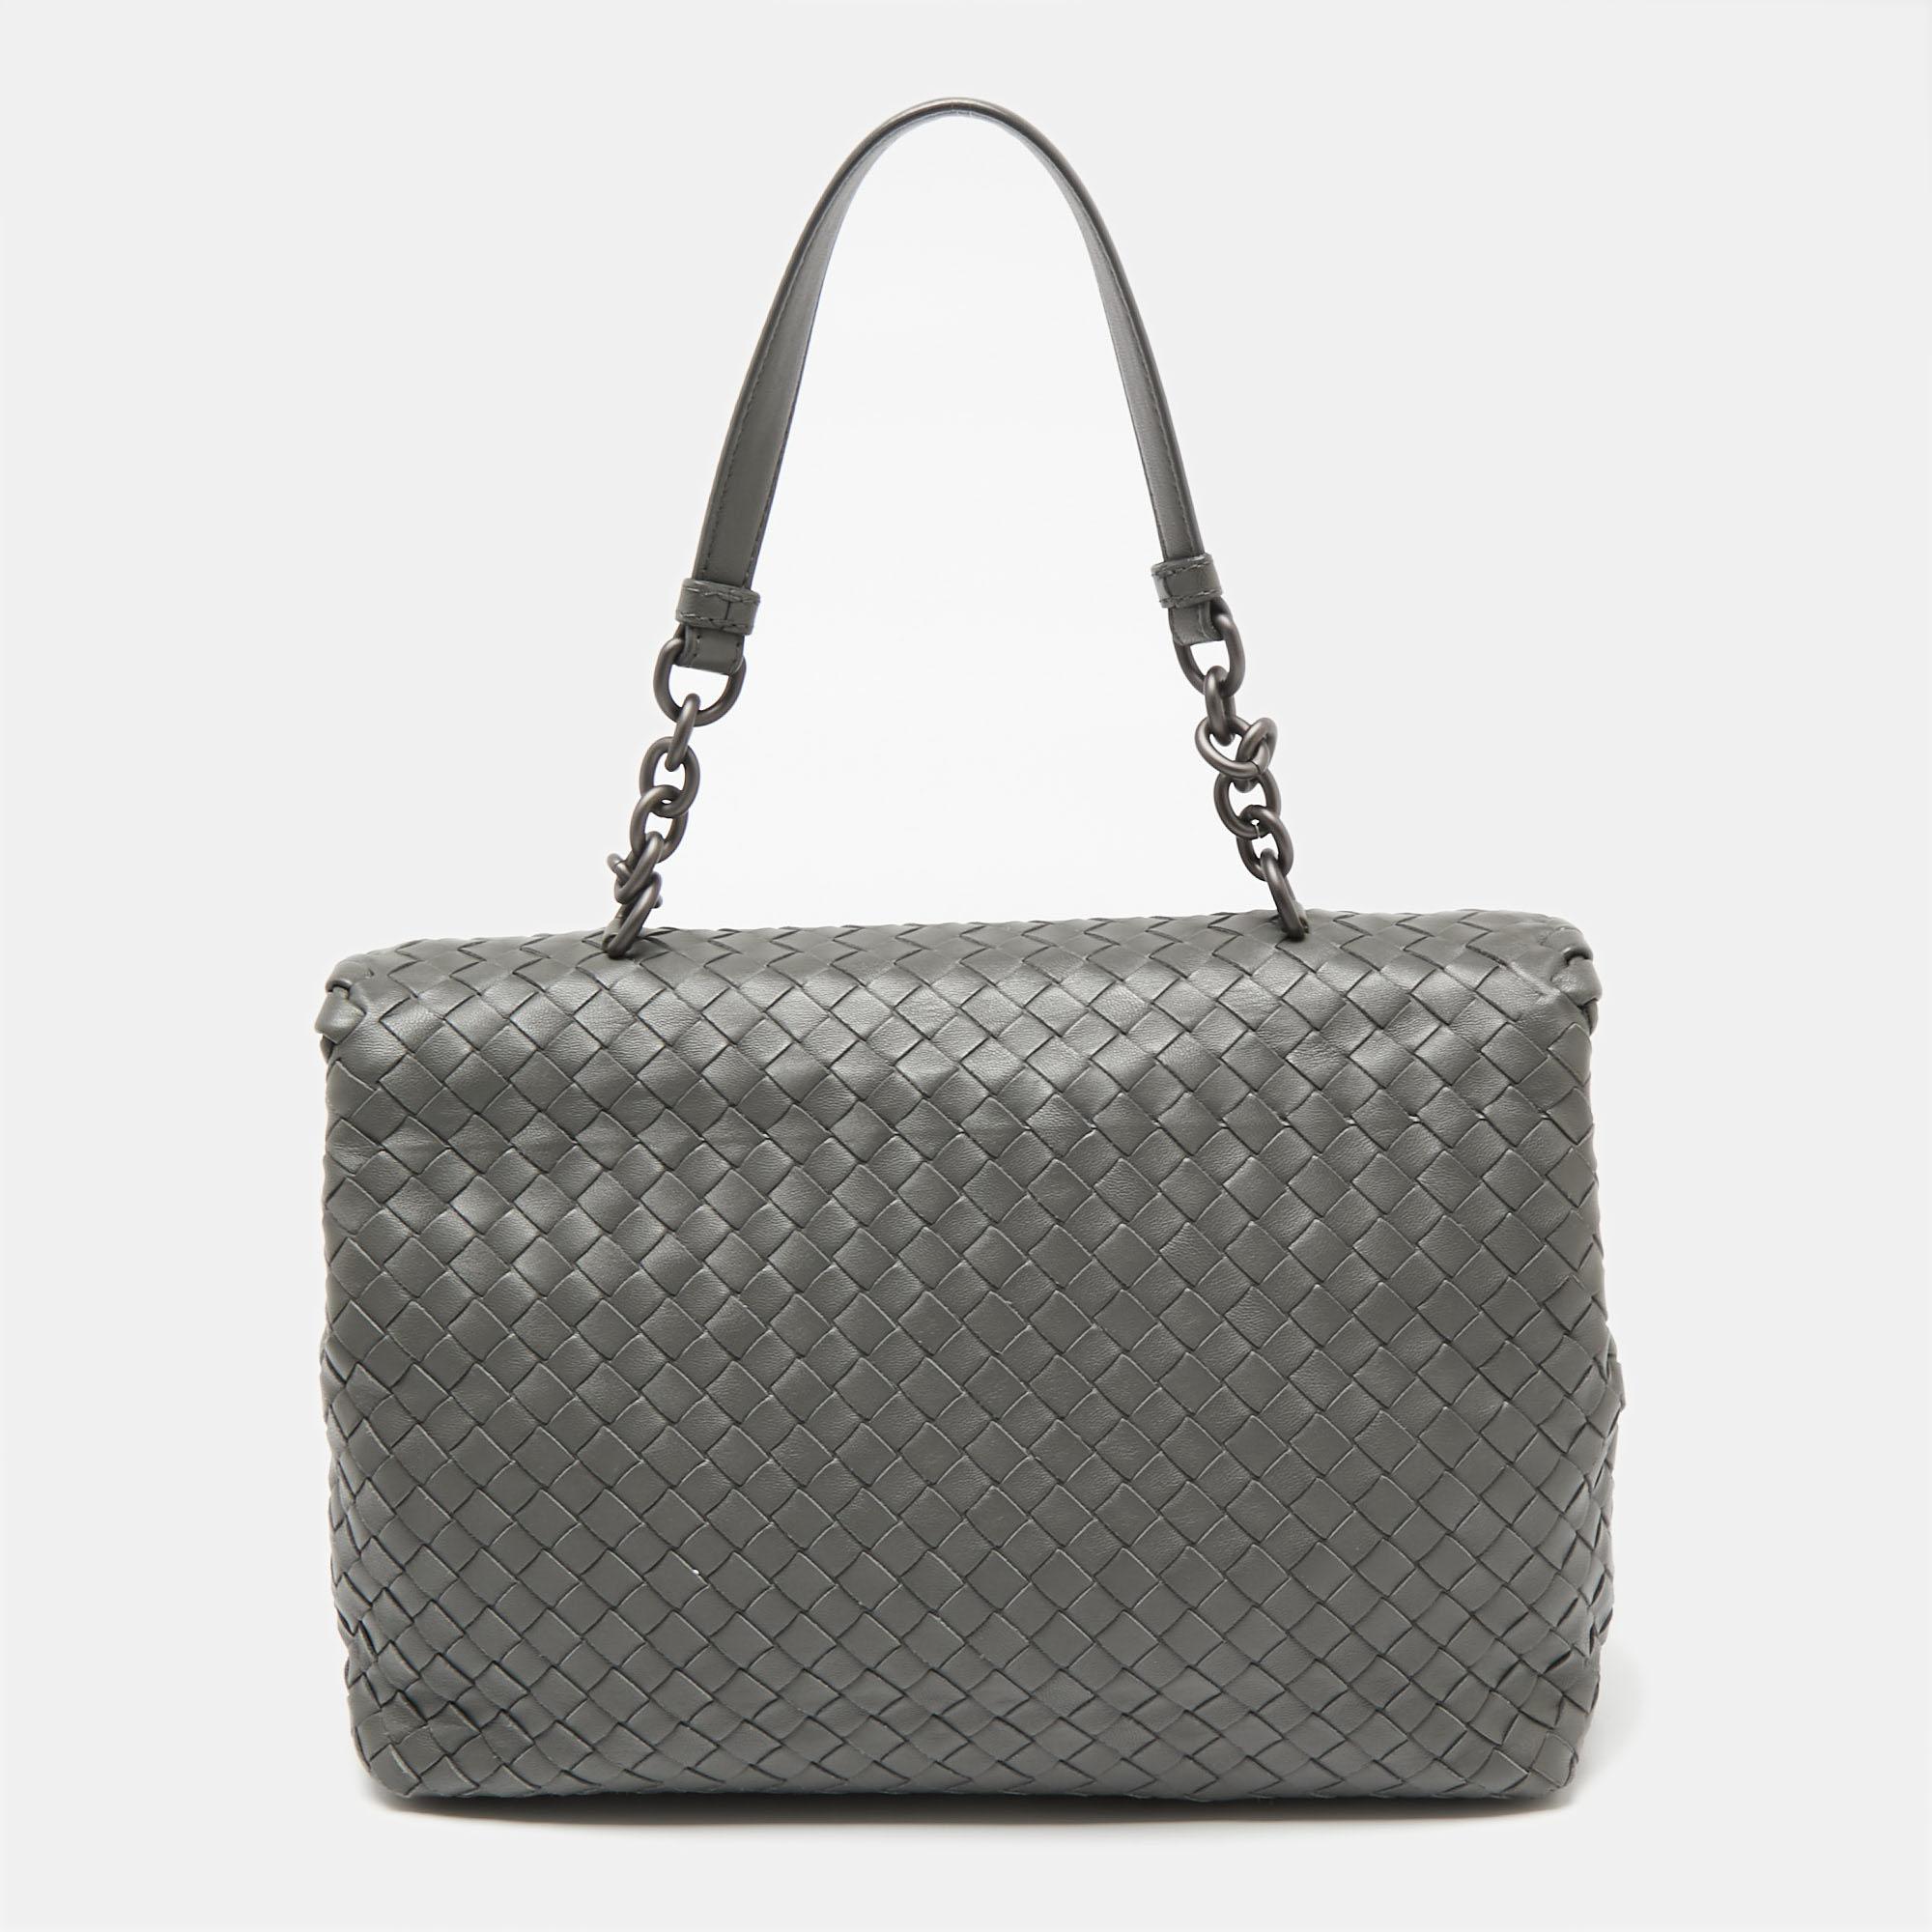 Bottega Veneta's Olimpia shoulder bag presents a luxurious appeal in every detail it carries. Crafted from Intrecciato leather, the shoulder bag has a flap design to secure the well-sized suede interior. It is held by a chain-link featuring two